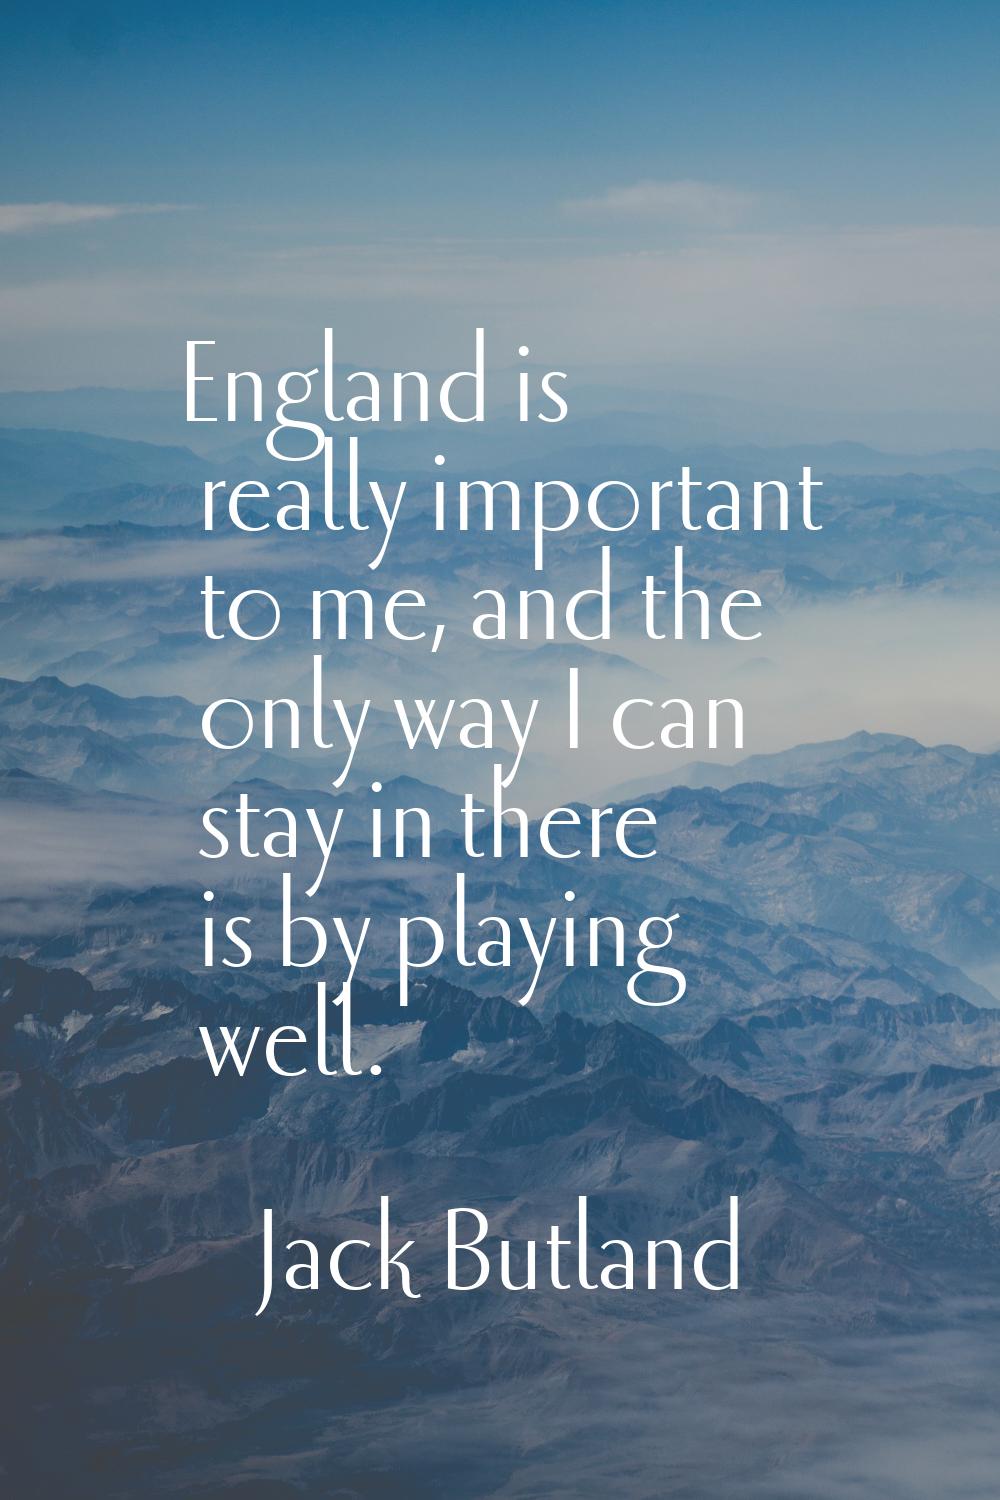 England is really important to me, and the only way I can stay in there is by playing well.